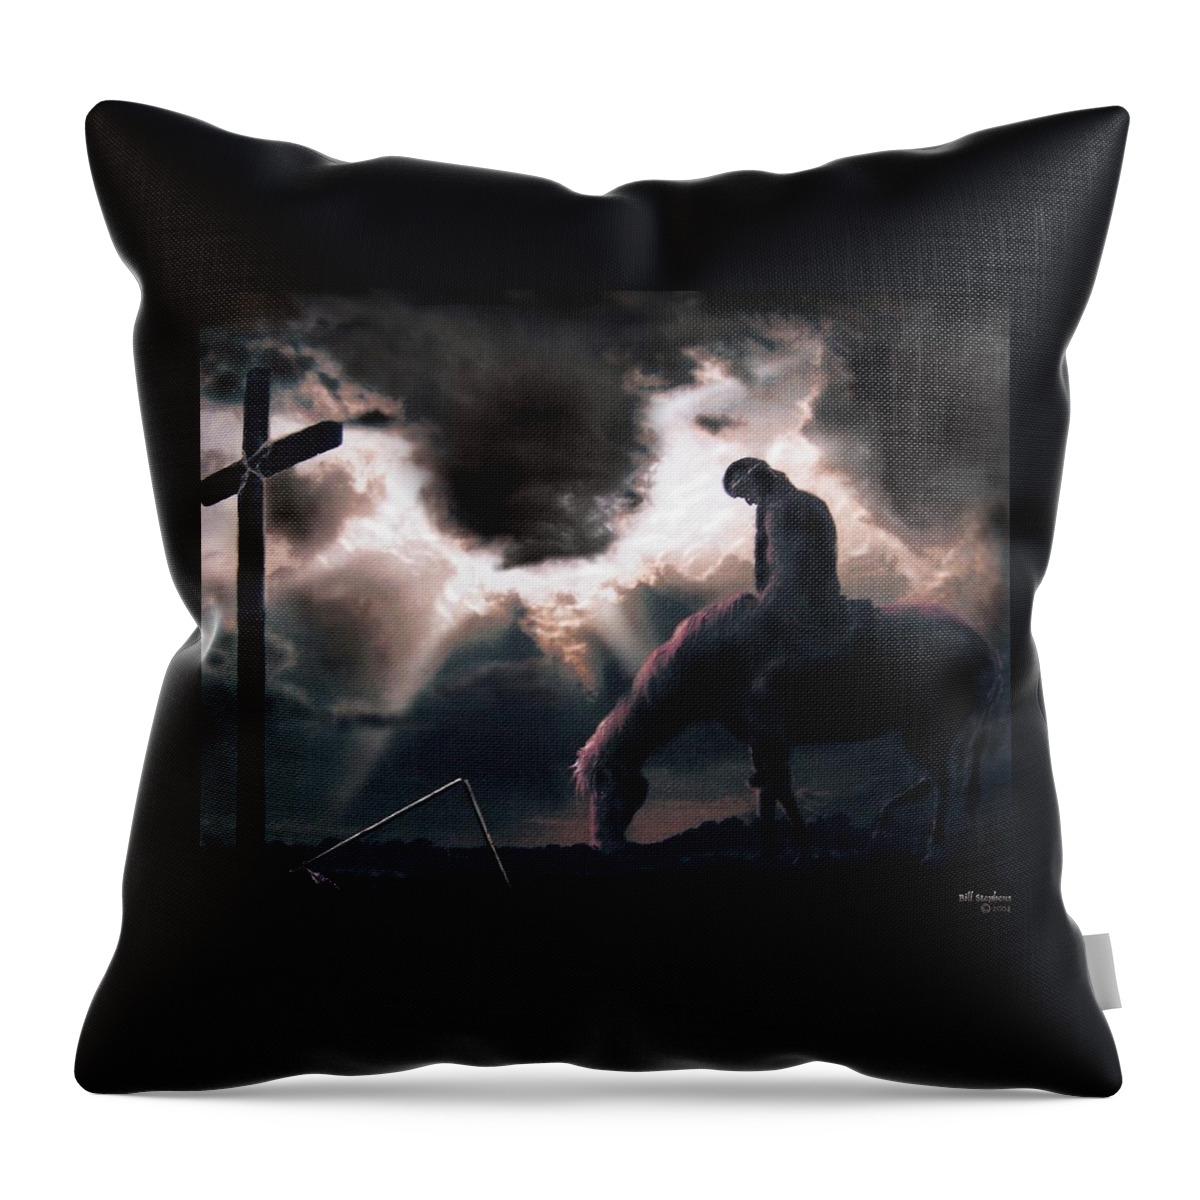 Horses Throw Pillow featuring the digital art The Final Battle by Bill Stephens